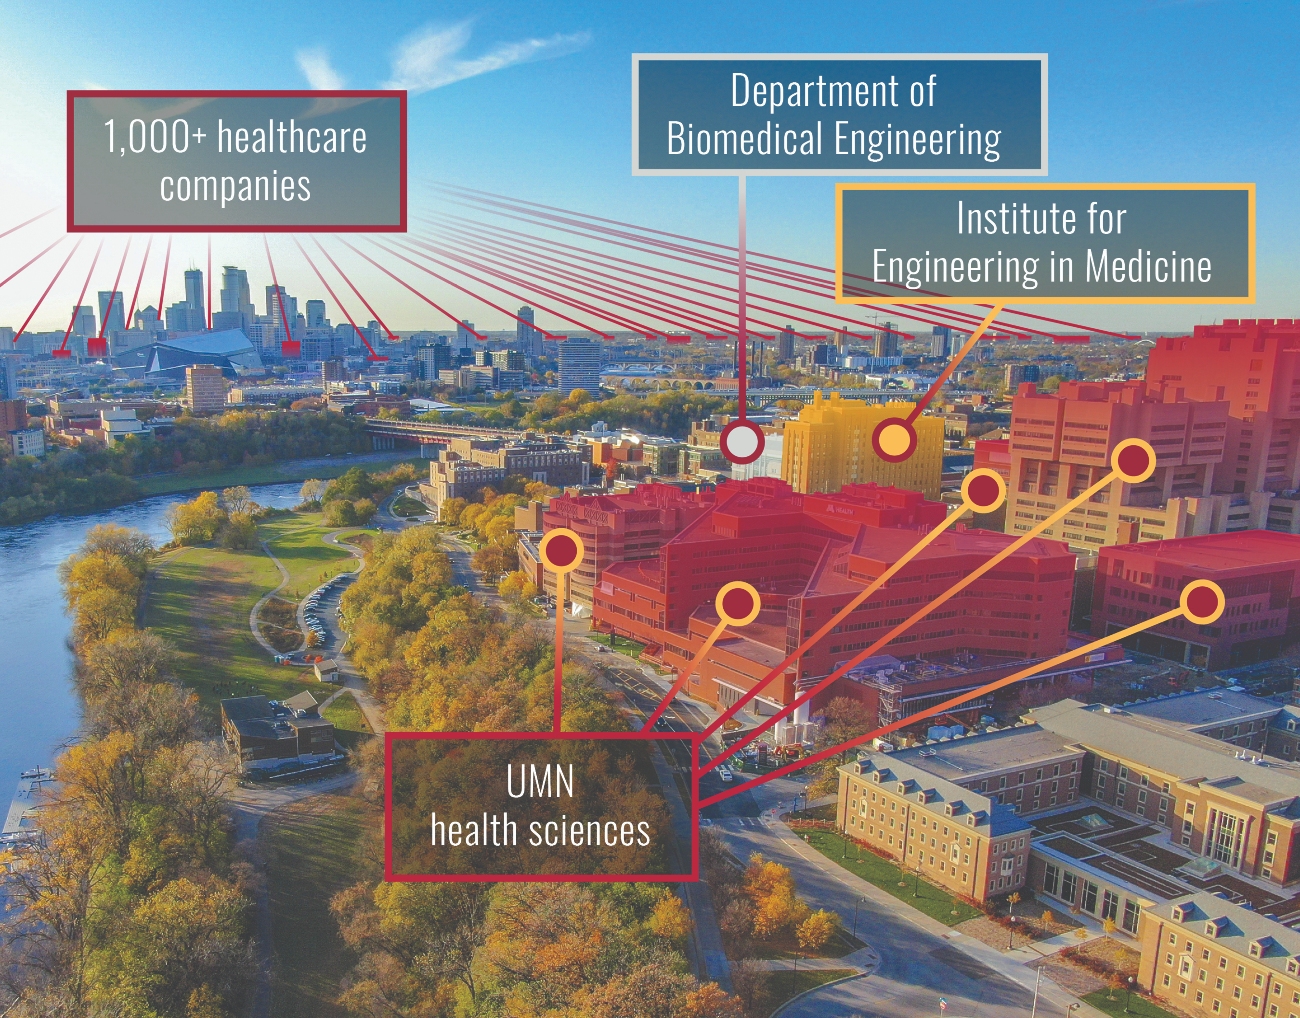 3D map showing the Dept. of Biomedical Engineering's proximity to the Institute for Engineering in Medicine, UMN health sciences and 1,000+ local healthcare companies